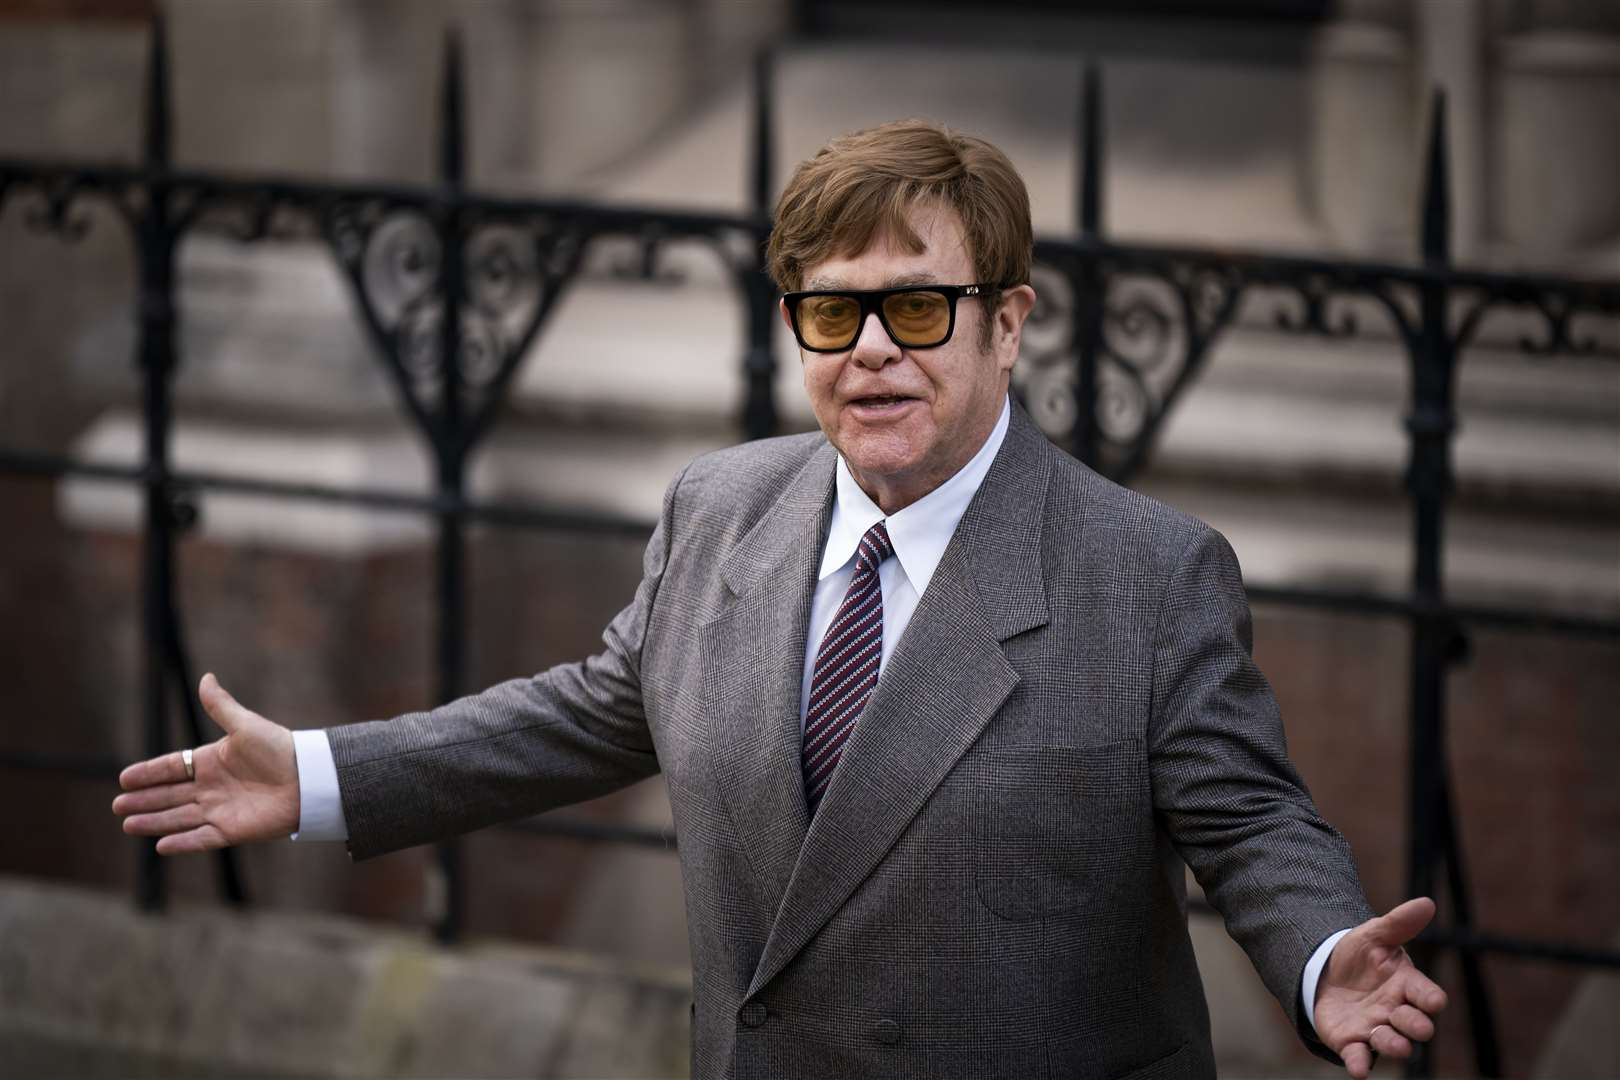 Sir Elton John, who is also bringing a claim against Associated Newspapers, previously attended a hearing at the Royal Courts Of Justice in London (Aaron Chown/PA)